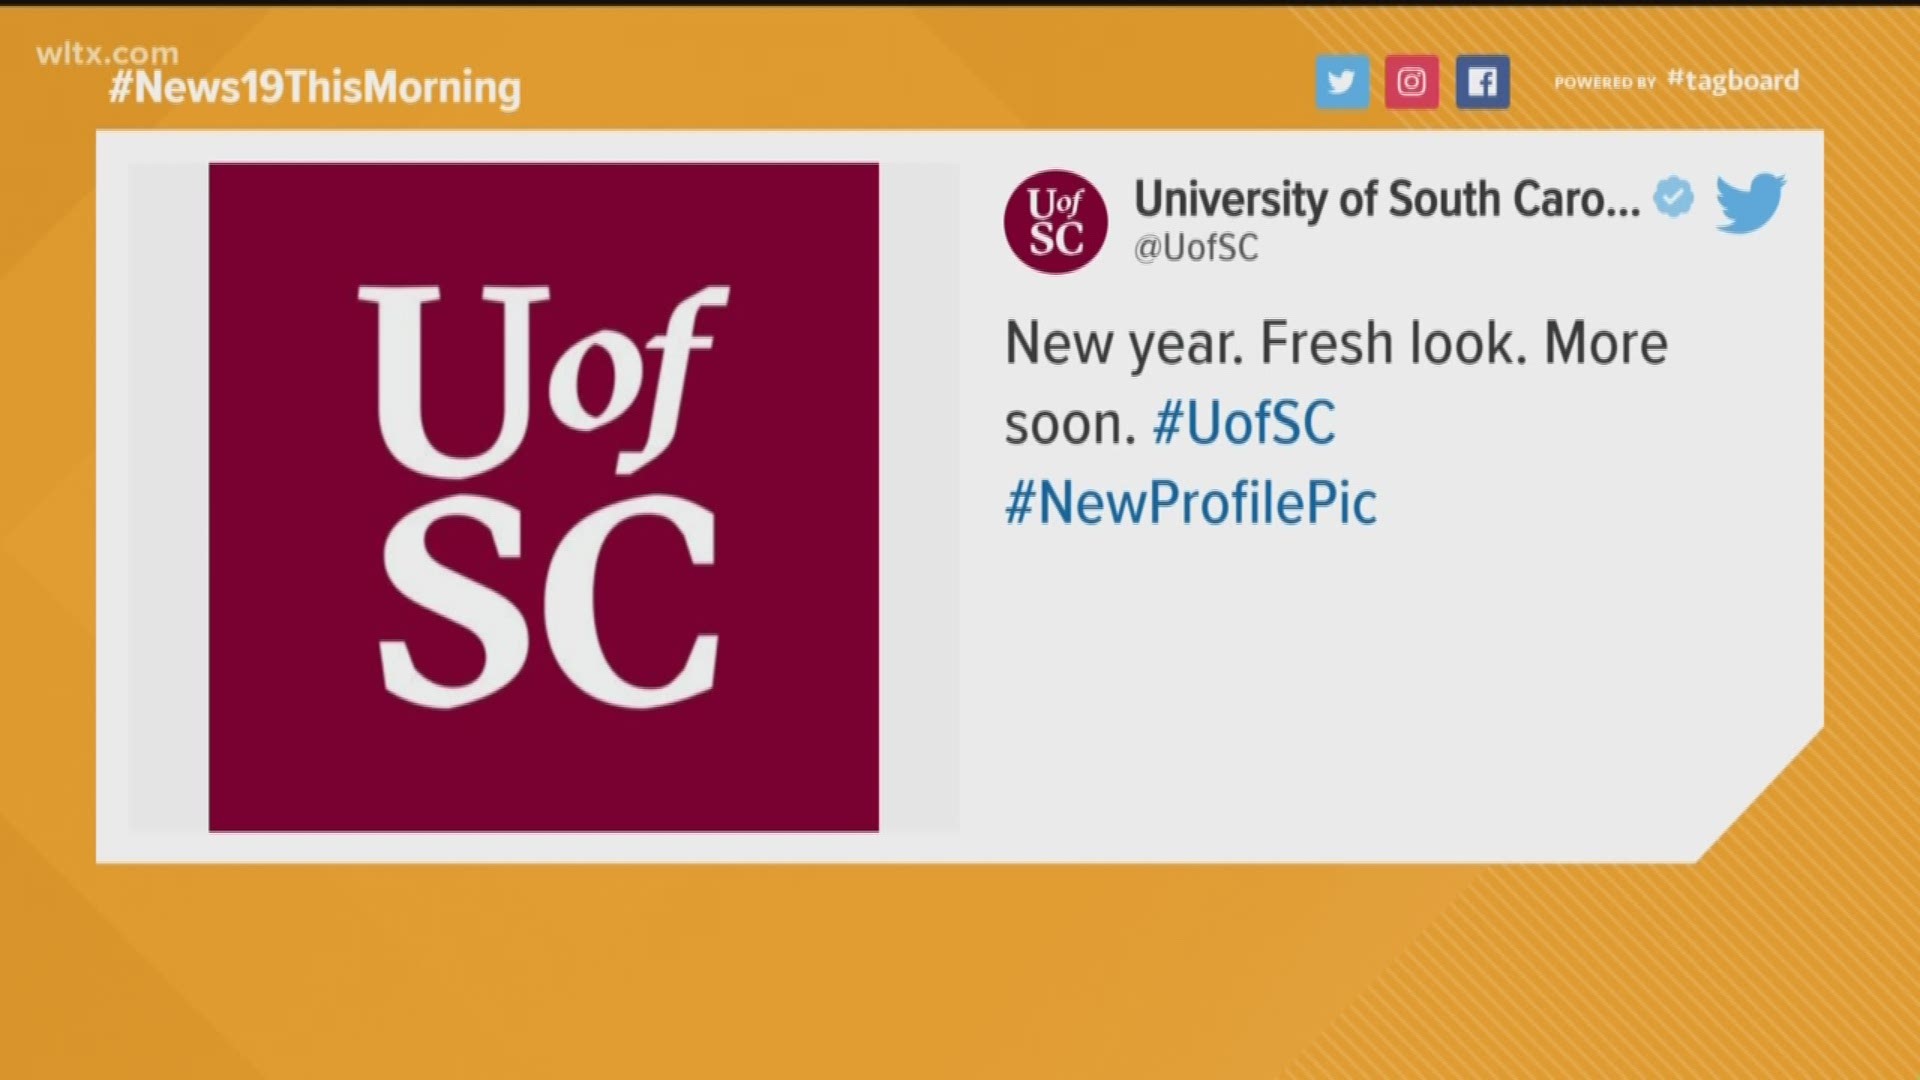 The University of South Carolina's new logo is being met with mixed reaction on social media.